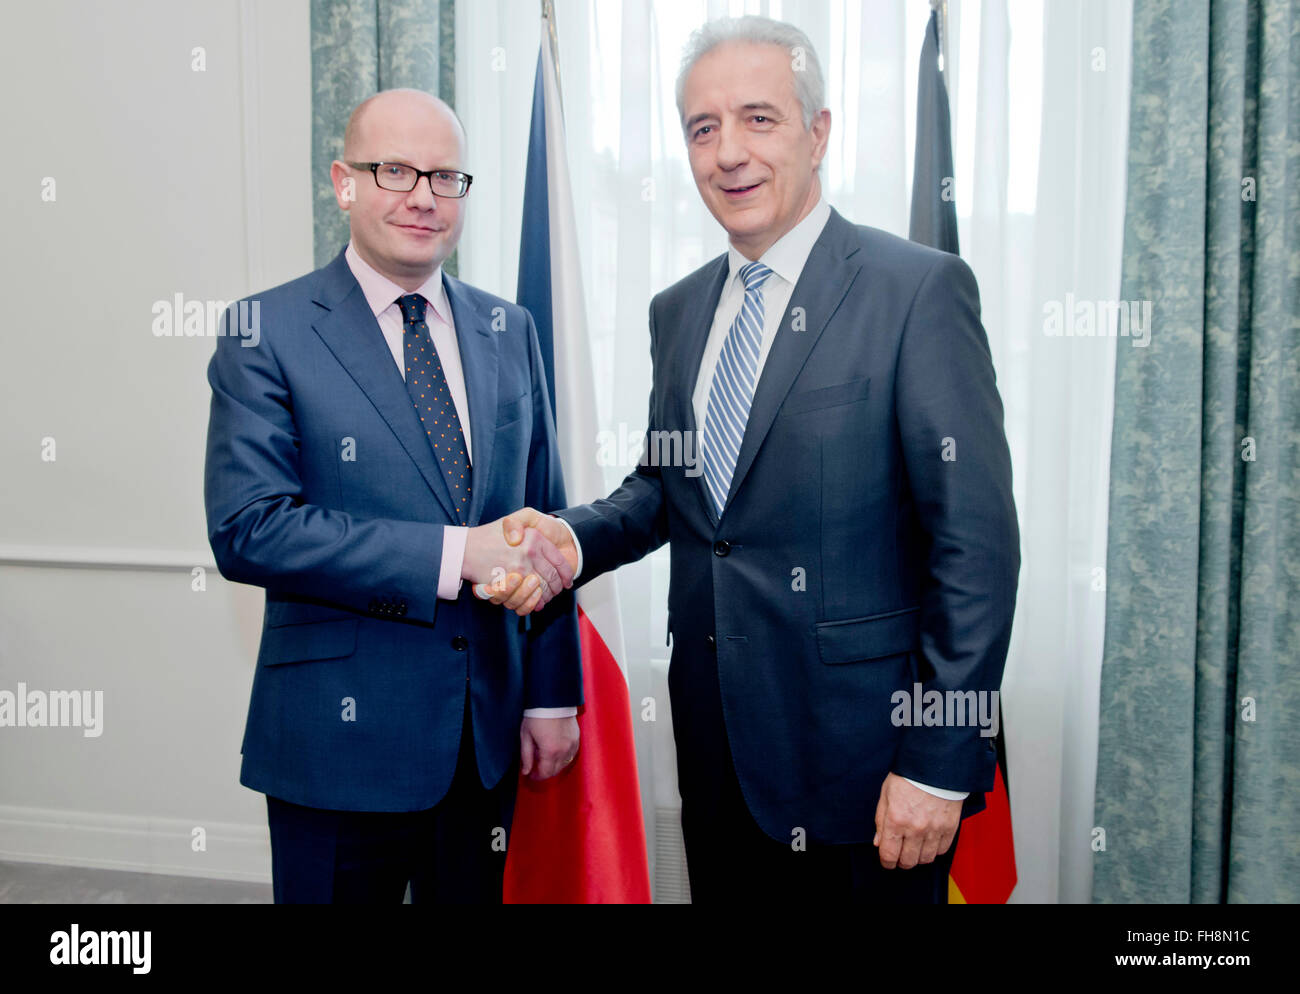 Prague, Czech Republic. 24th Feb, 2016. Czech Prime Minister Bohuslav Sobotka (left) meets chairman of Germany's Bundesrat and Saxony's Minister-President Stanislaw Tillich to discuss cross-border transport infrastructure, Czech-German cooperation in the sphere of science and investments and Czech-German strategic dialogue in Prague, Czech Republic, February 24, 2016. © Vit Simanek/CTK Photo/Alamy Live News Stock Photo